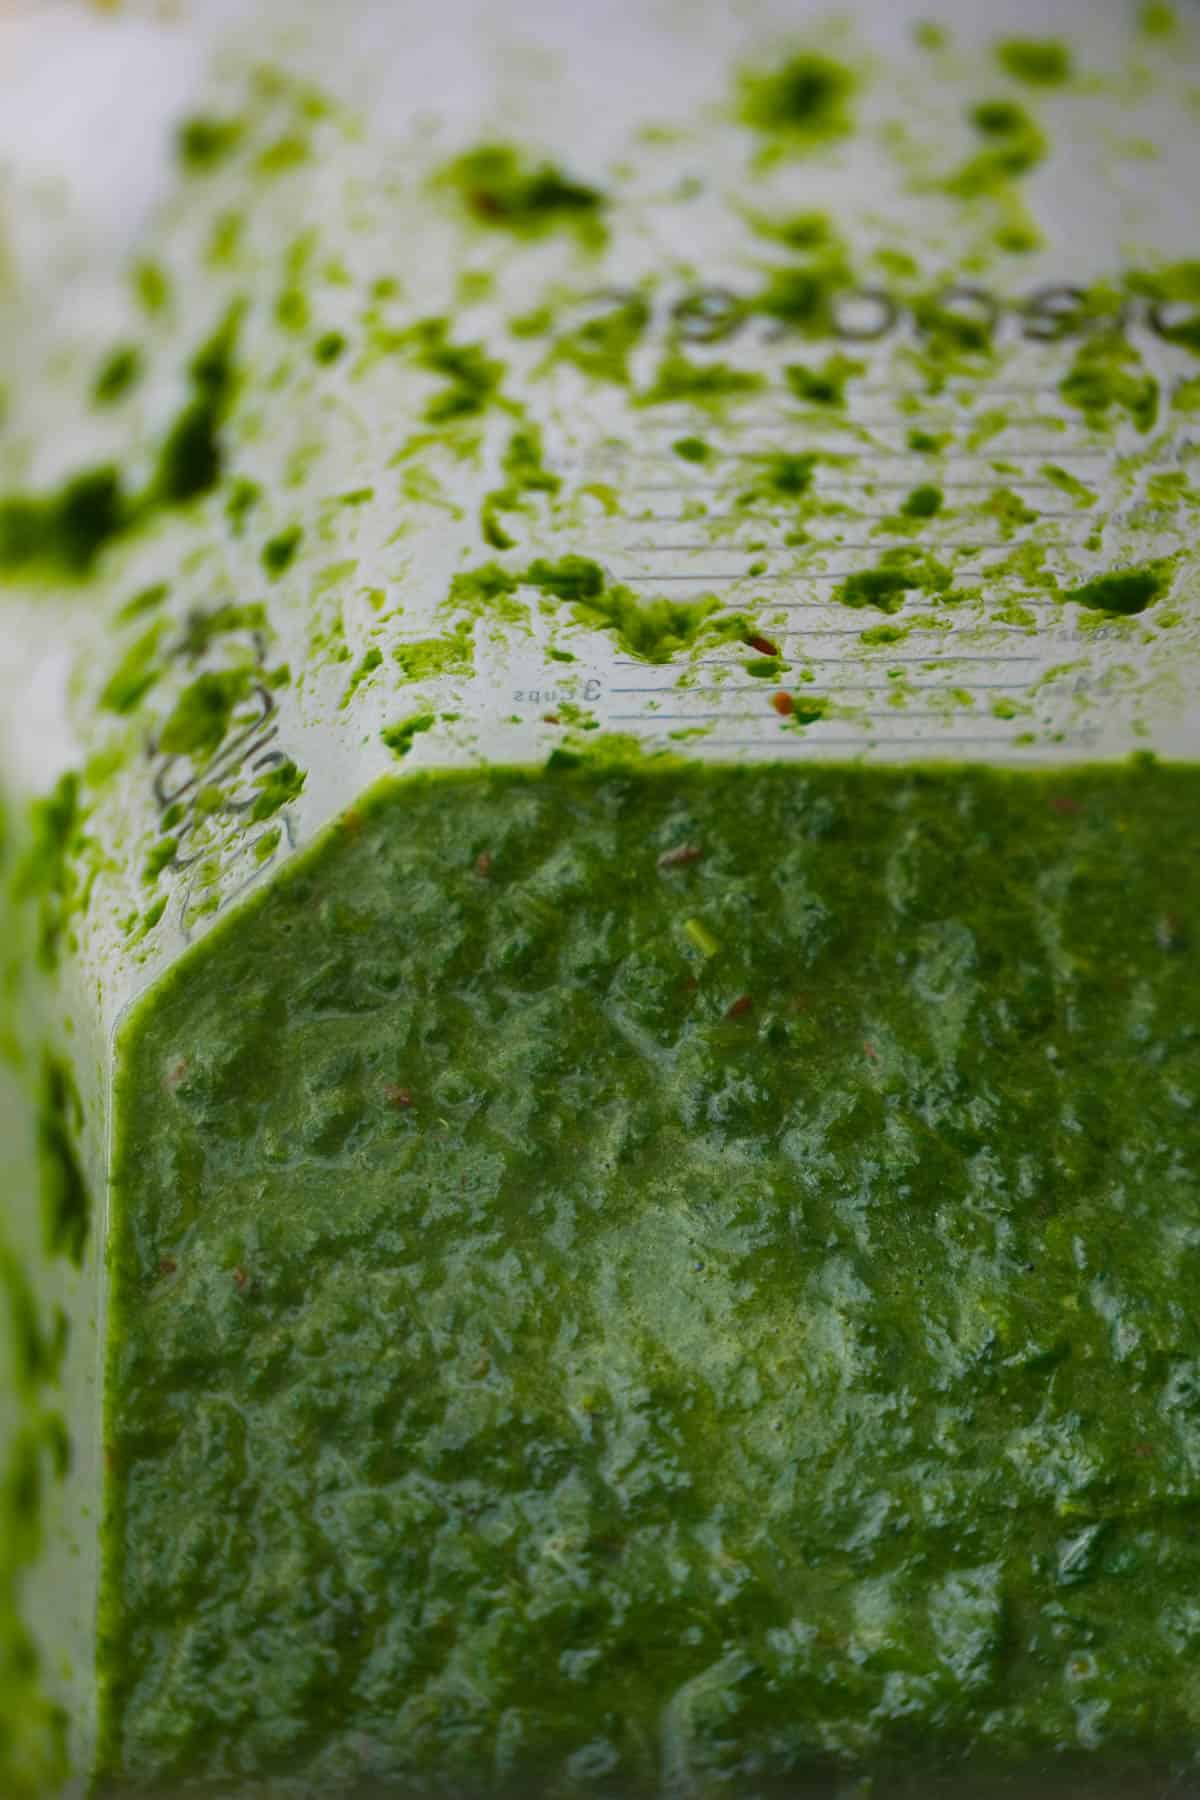 Spinach is pureed in a blender pitcher.